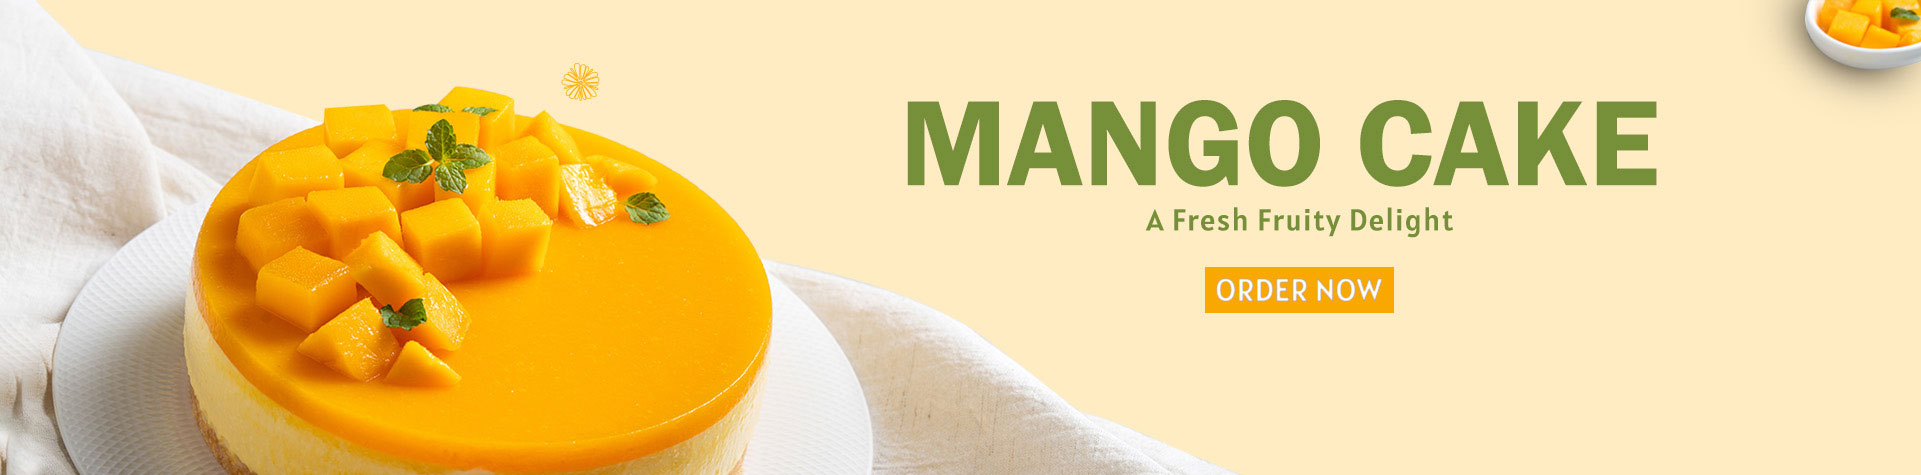 Mango Cake Online Delivery